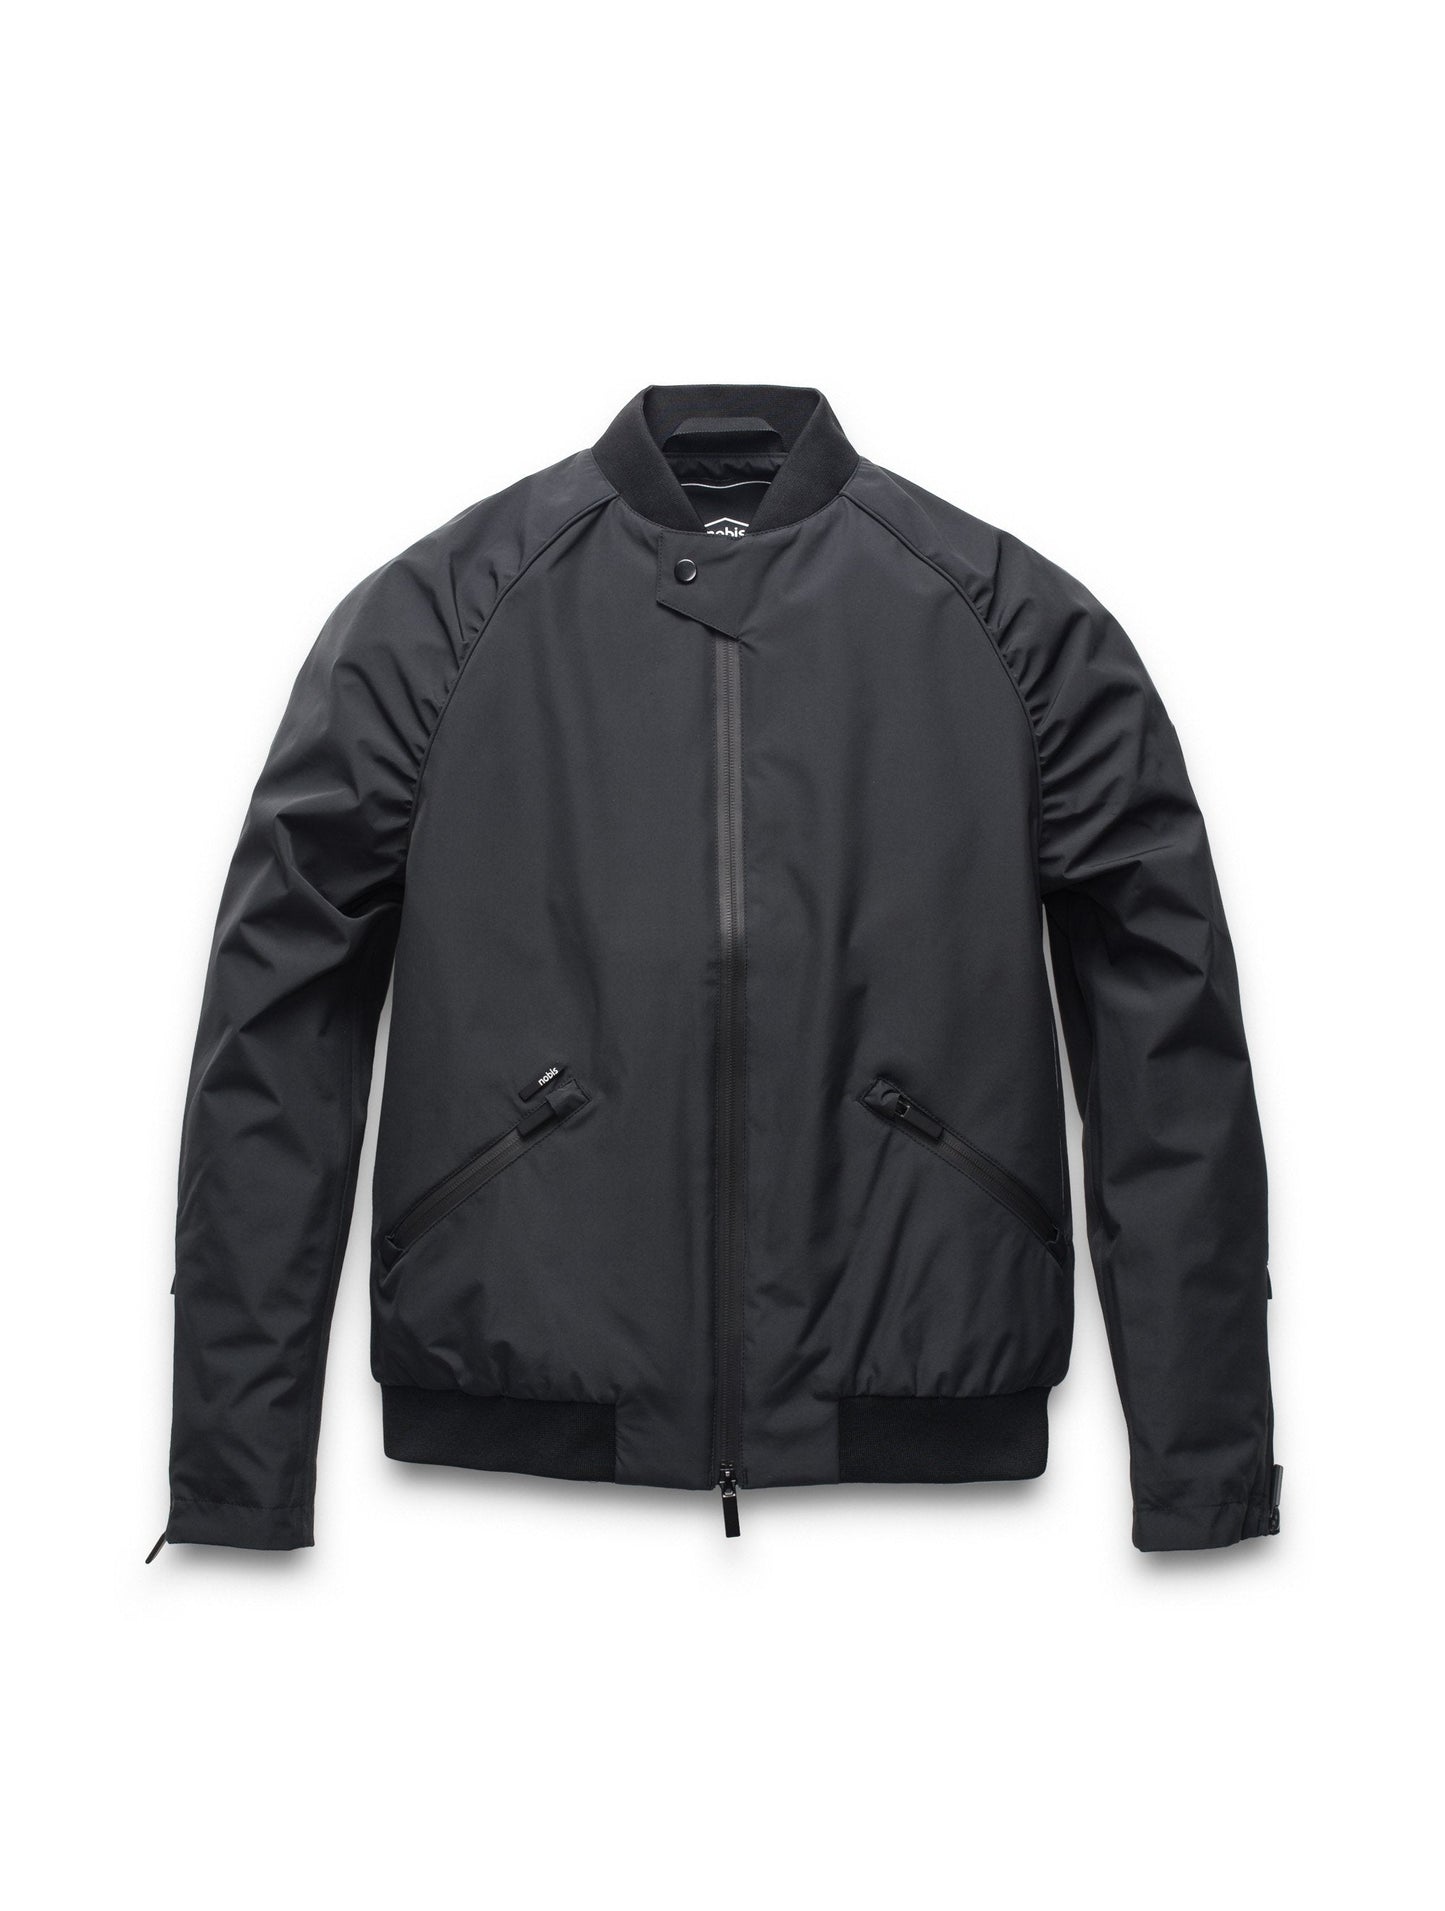 Women's classic bomber jacket called Phoebe in Black